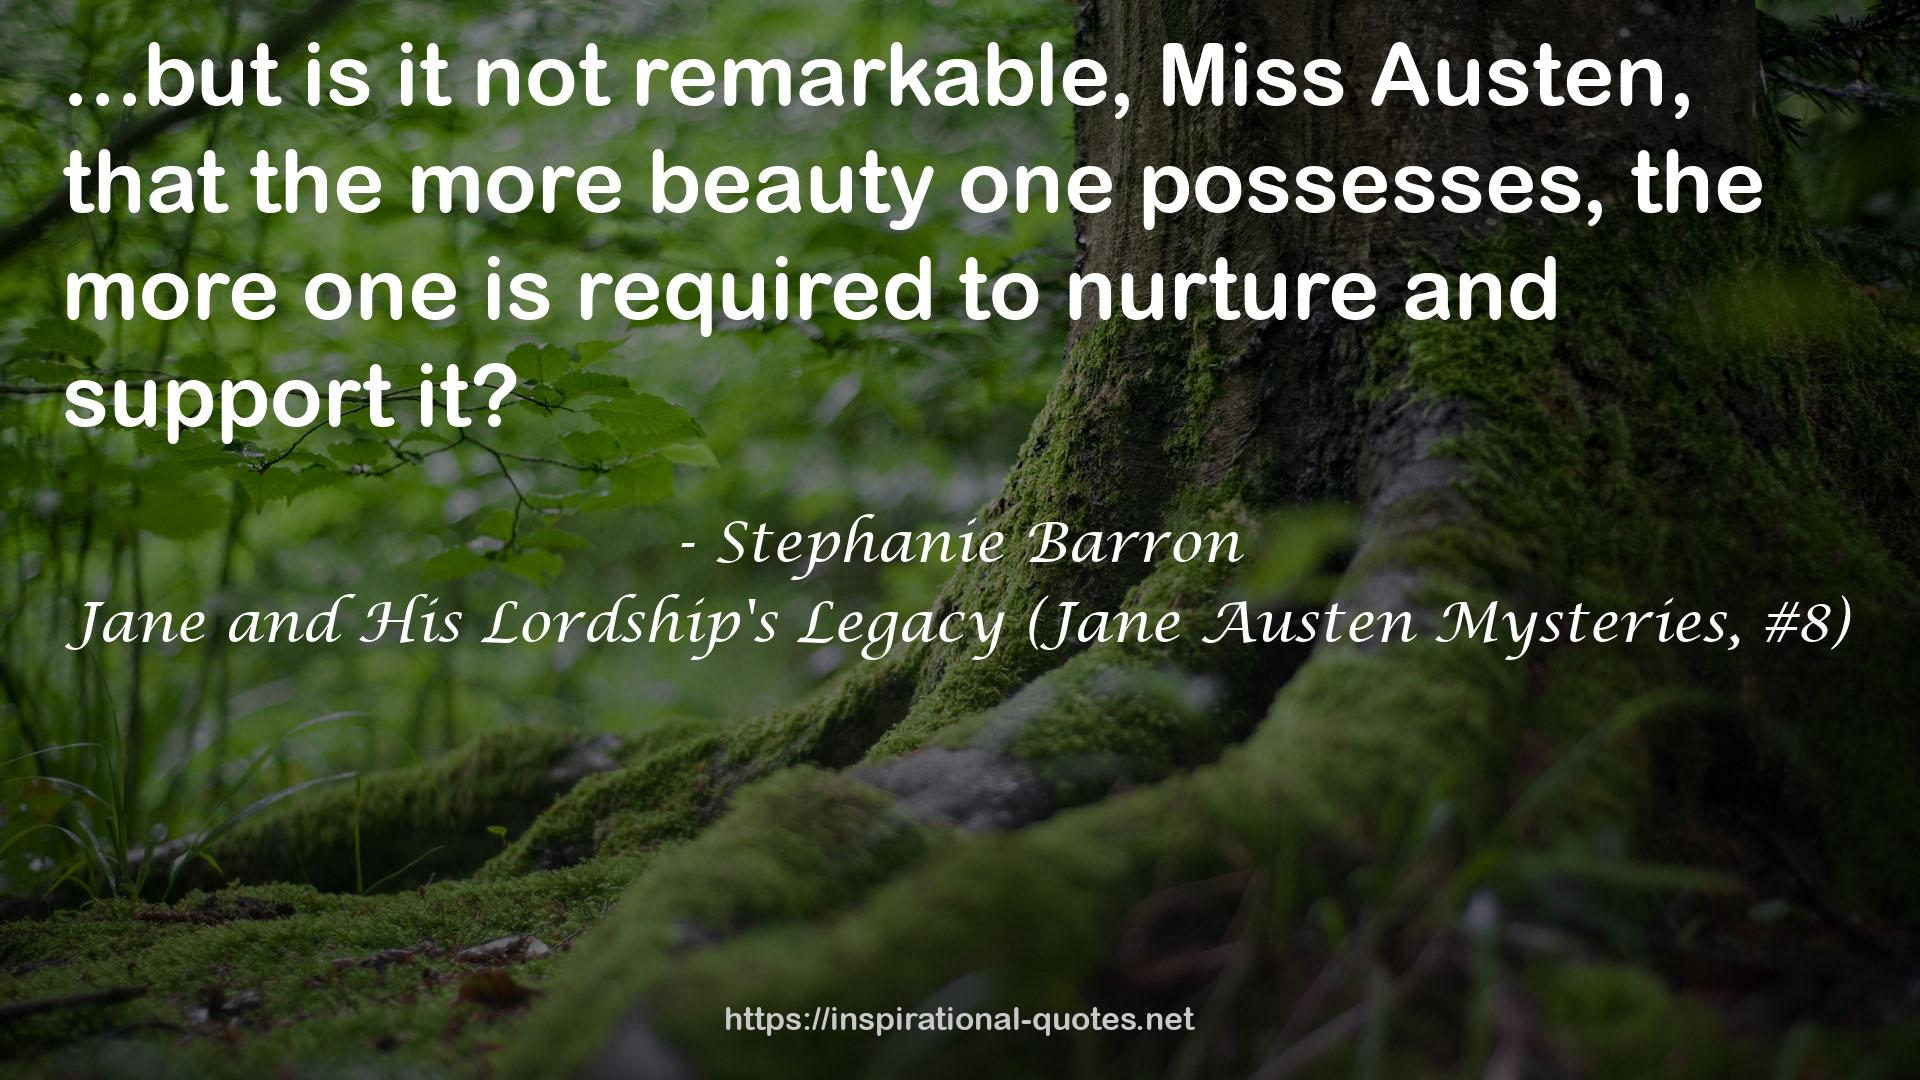 Jane and His Lordship's Legacy (Jane Austen Mysteries, #8) QUOTES